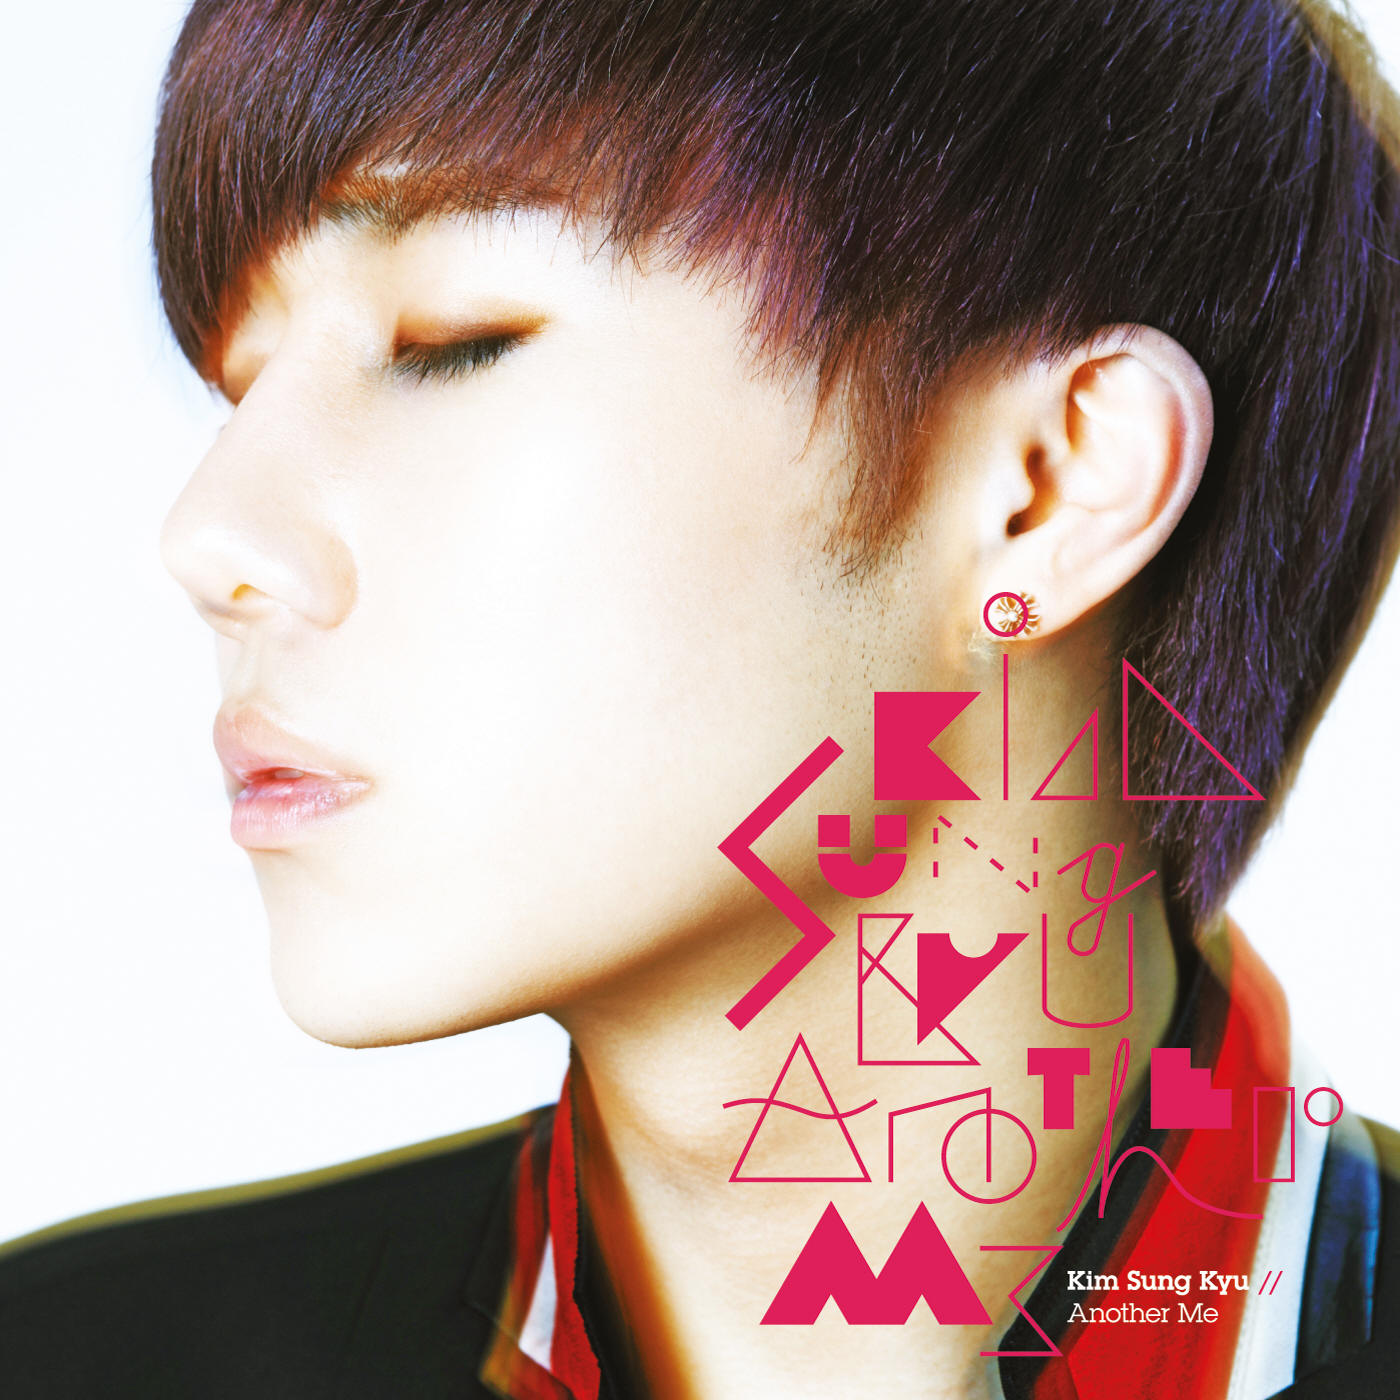 Kim Sung Kyu - Another me (2012)